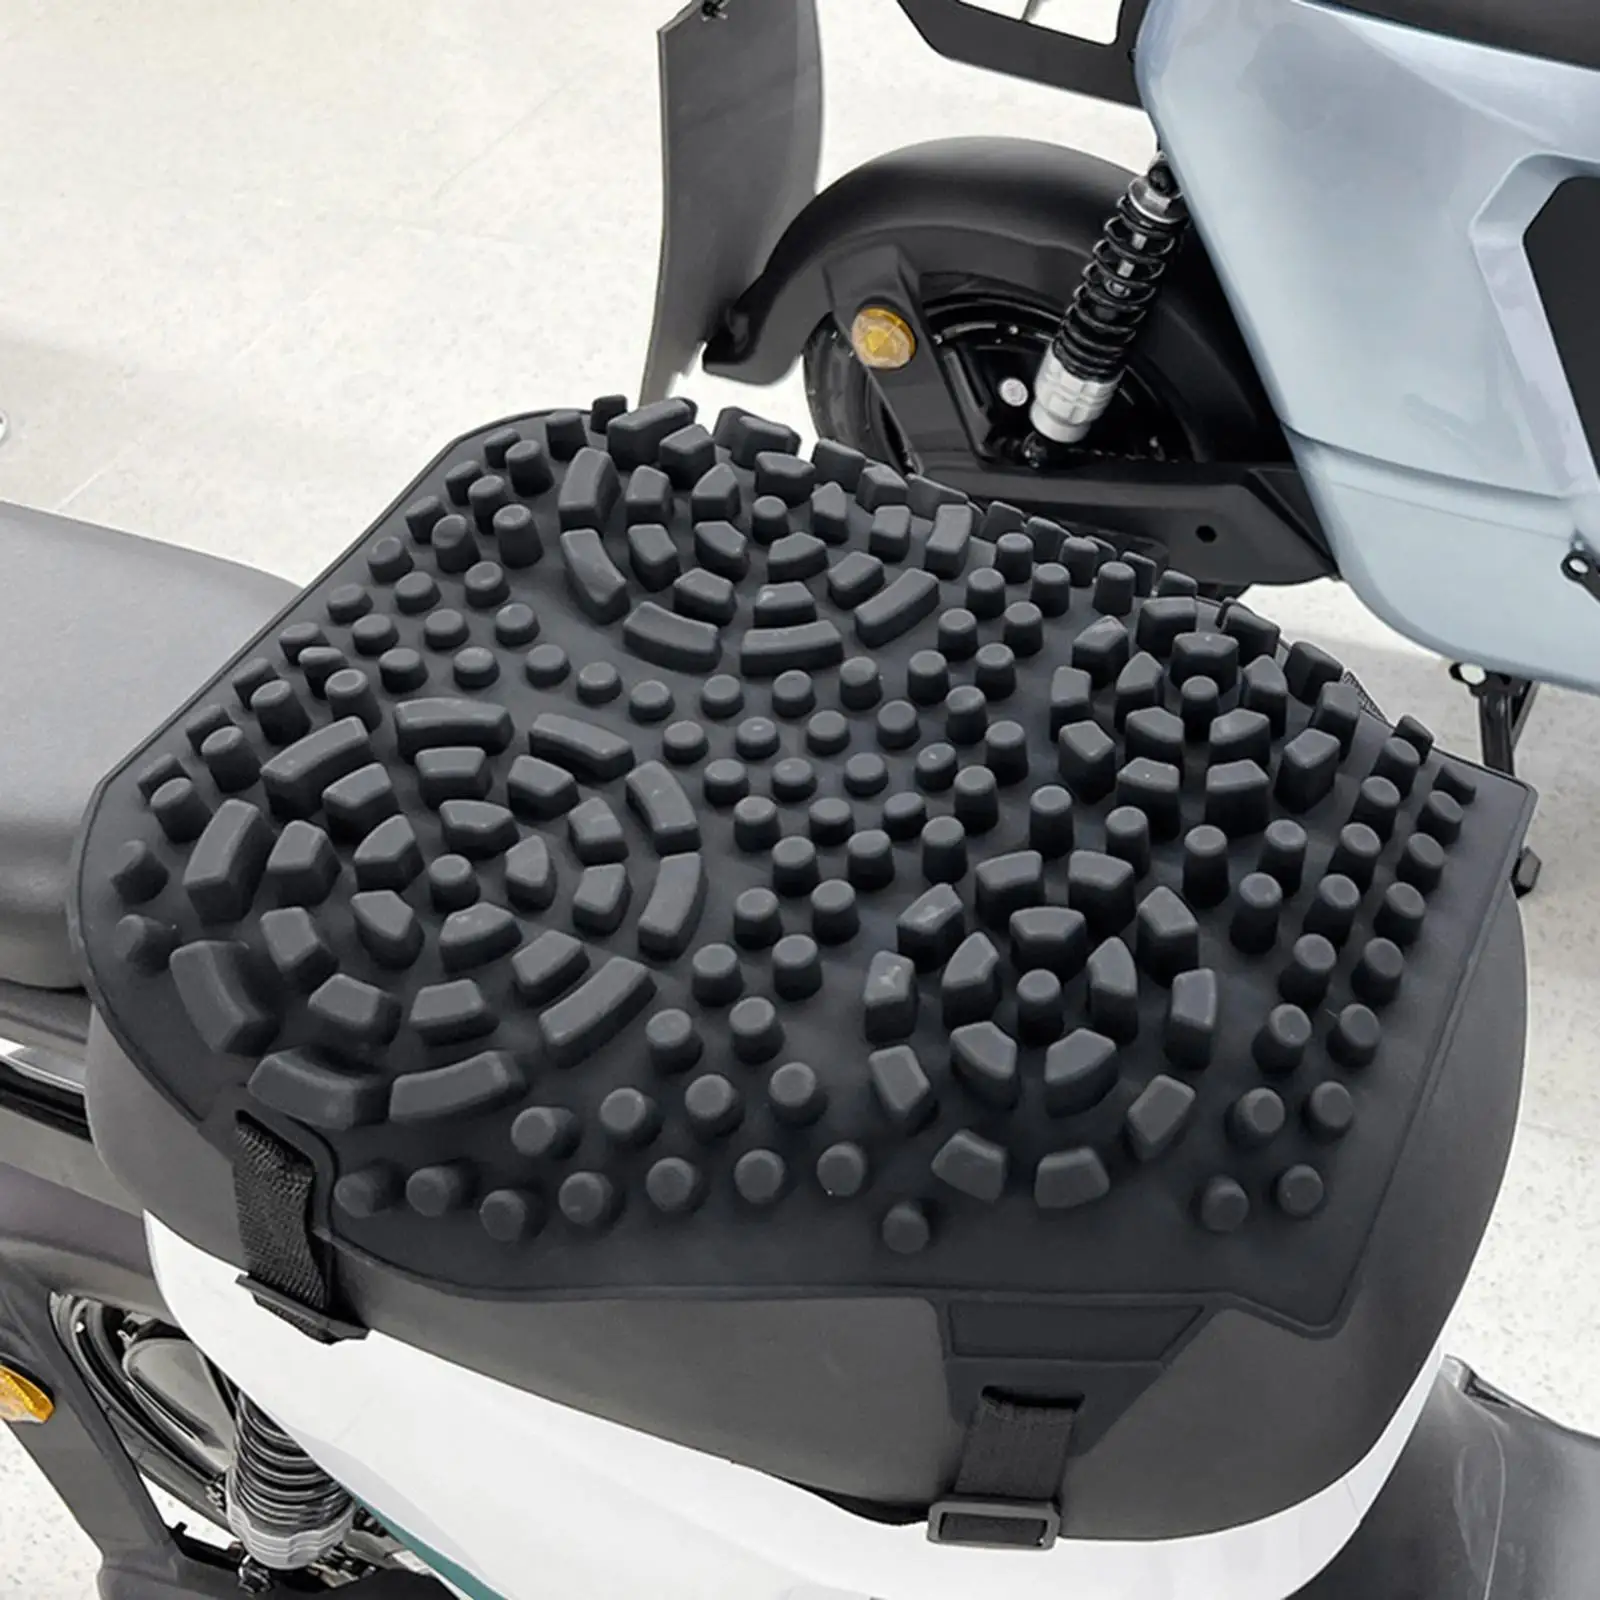 Motorcycle Seat Pad Cover Silicone Waterproof Shock Absorption Universal Ride Saddle